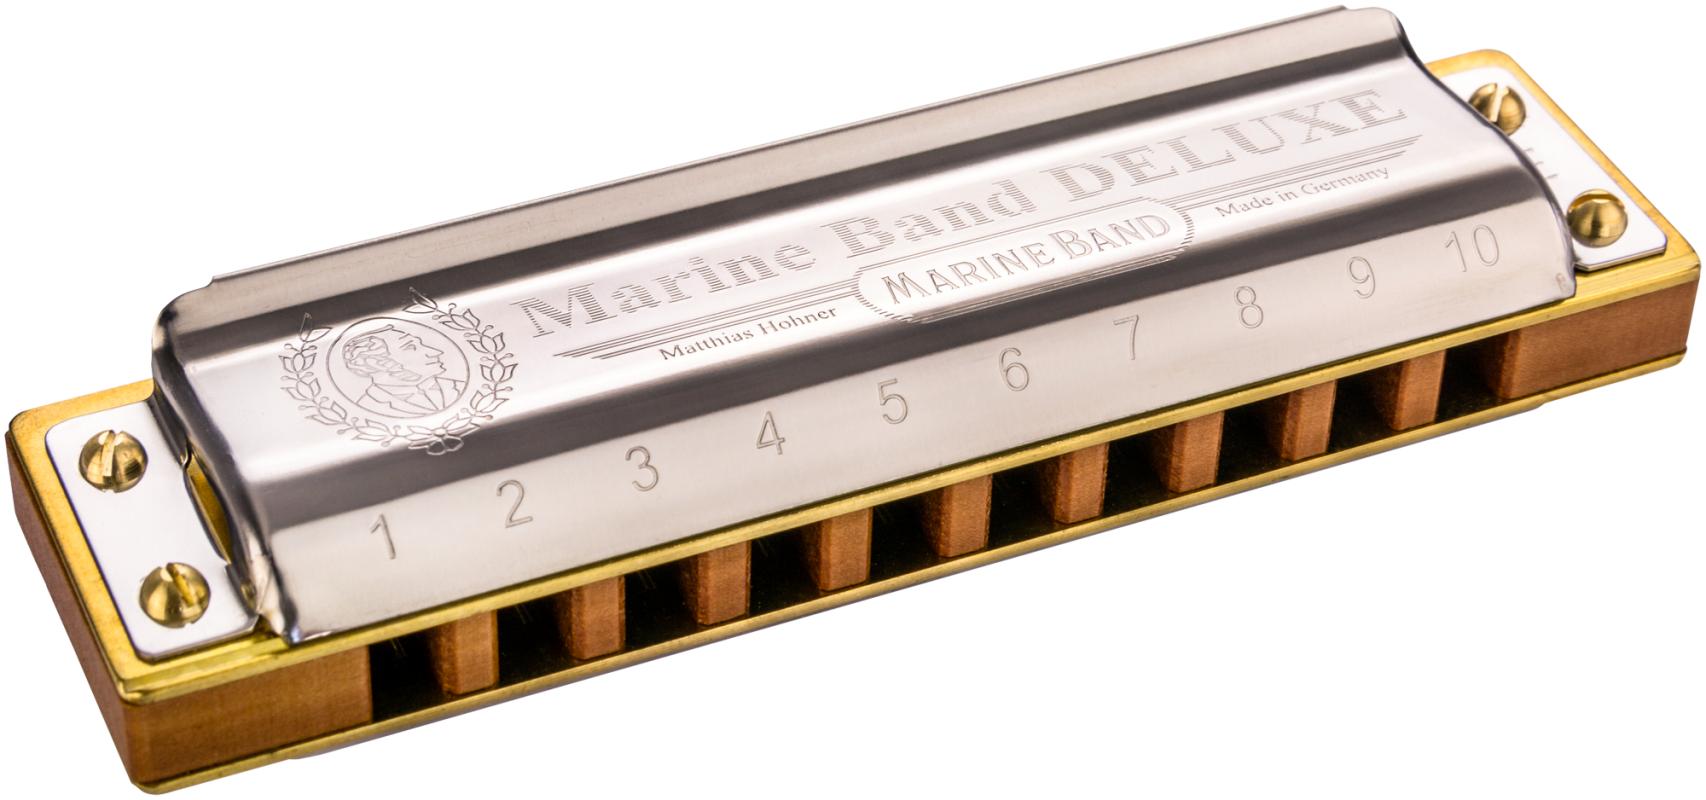 Marine-Band Deluxe As-Dur